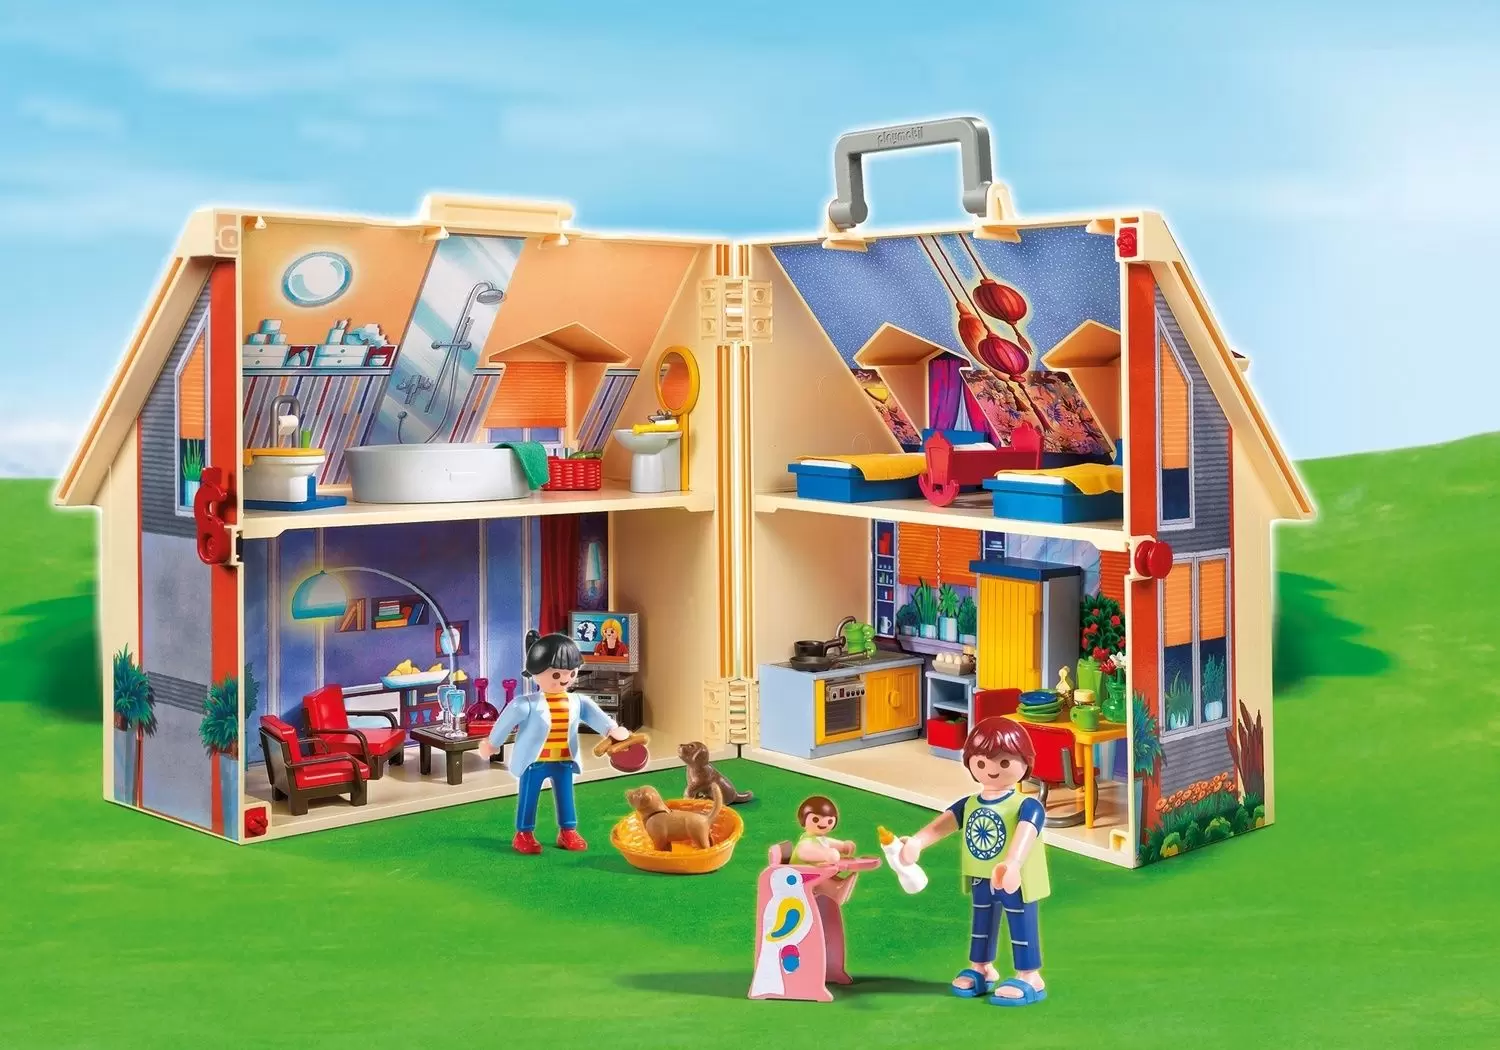 Take Along Modern Doll House - Playmobil Houses and Furniture 5167